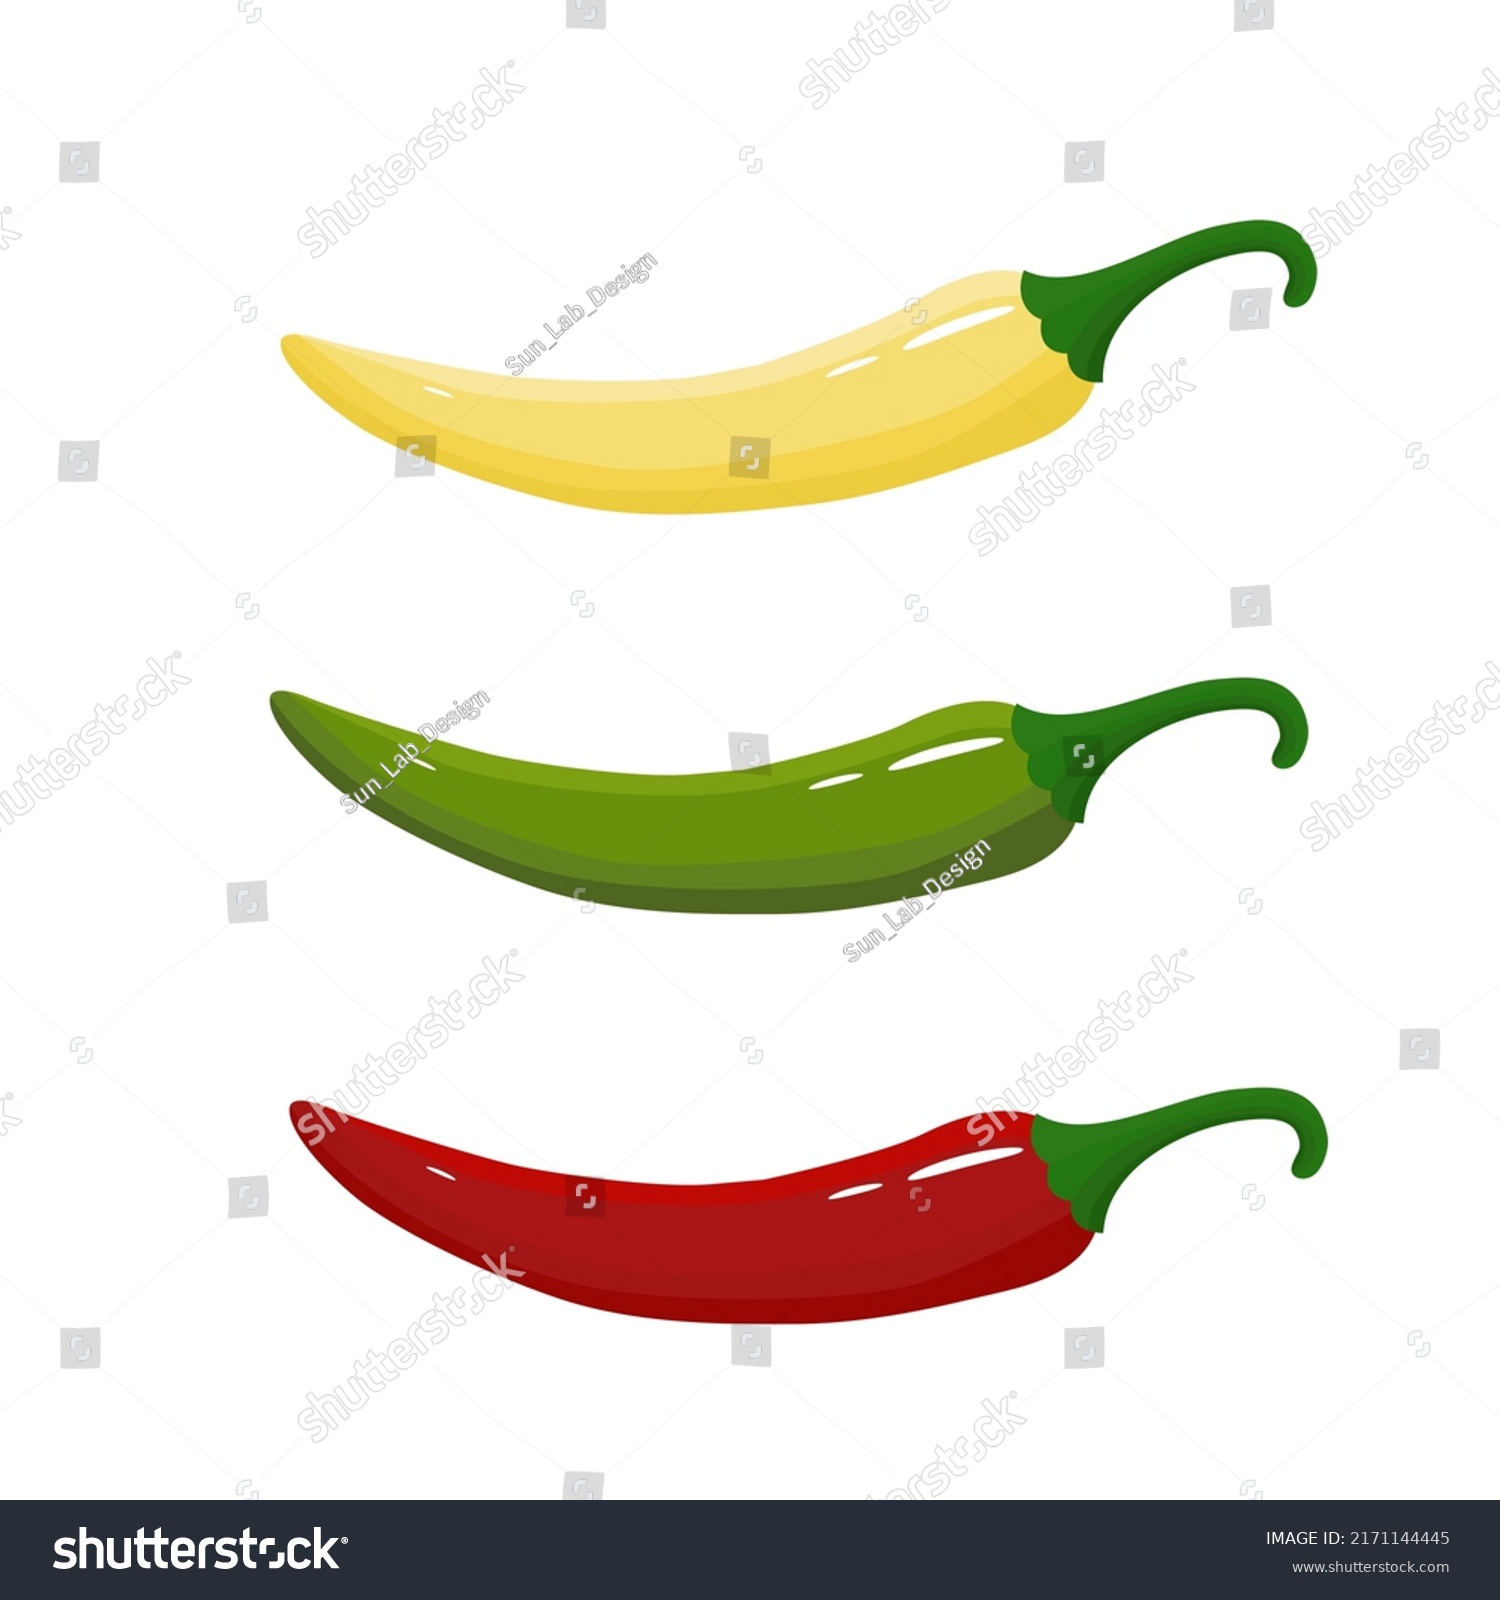 Chili peppers icons set. Yellow,green,red chili peppers on white background. Fresh spices. Illustration for design and print #2171144445